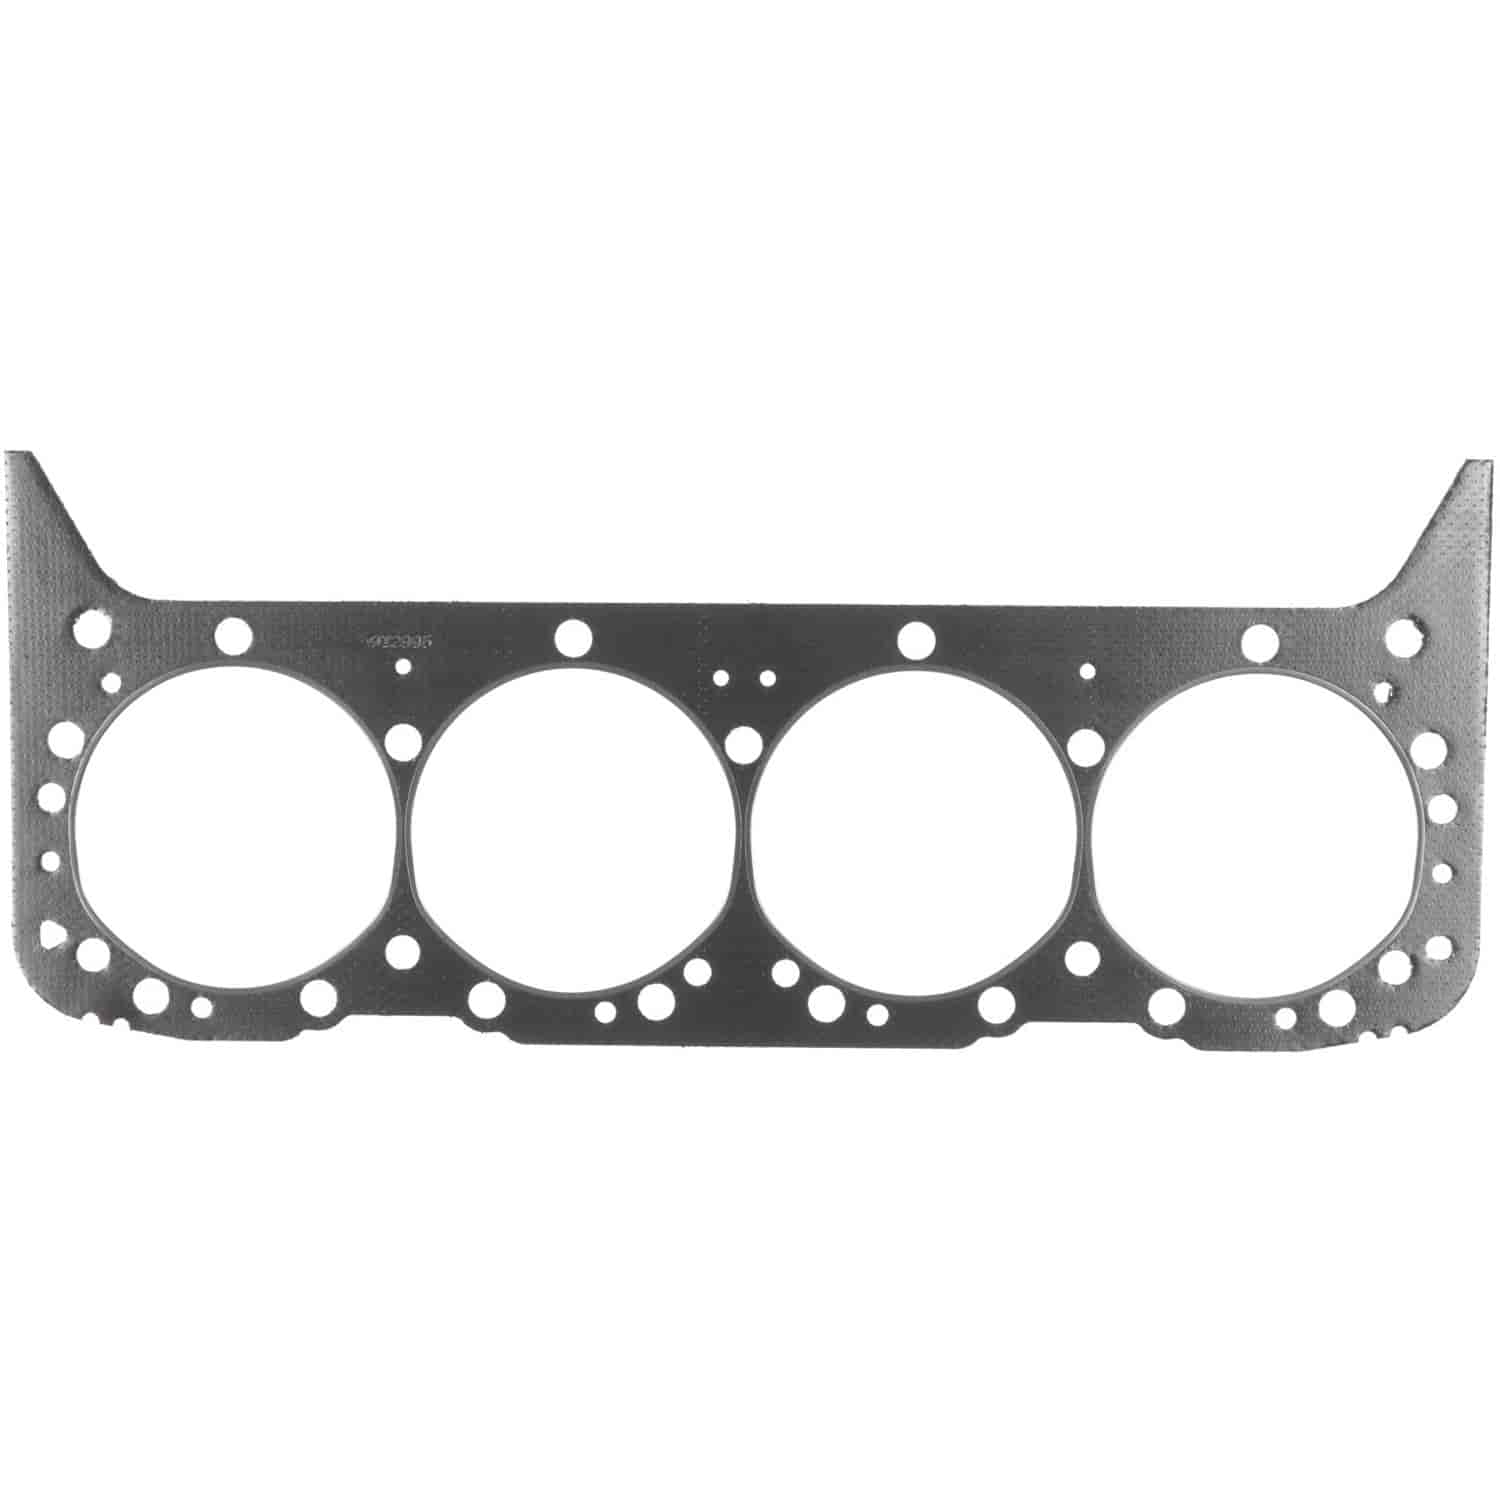 Performance Head Gasket 1957-2002 Small Block Chevy 283/302/307/327/350